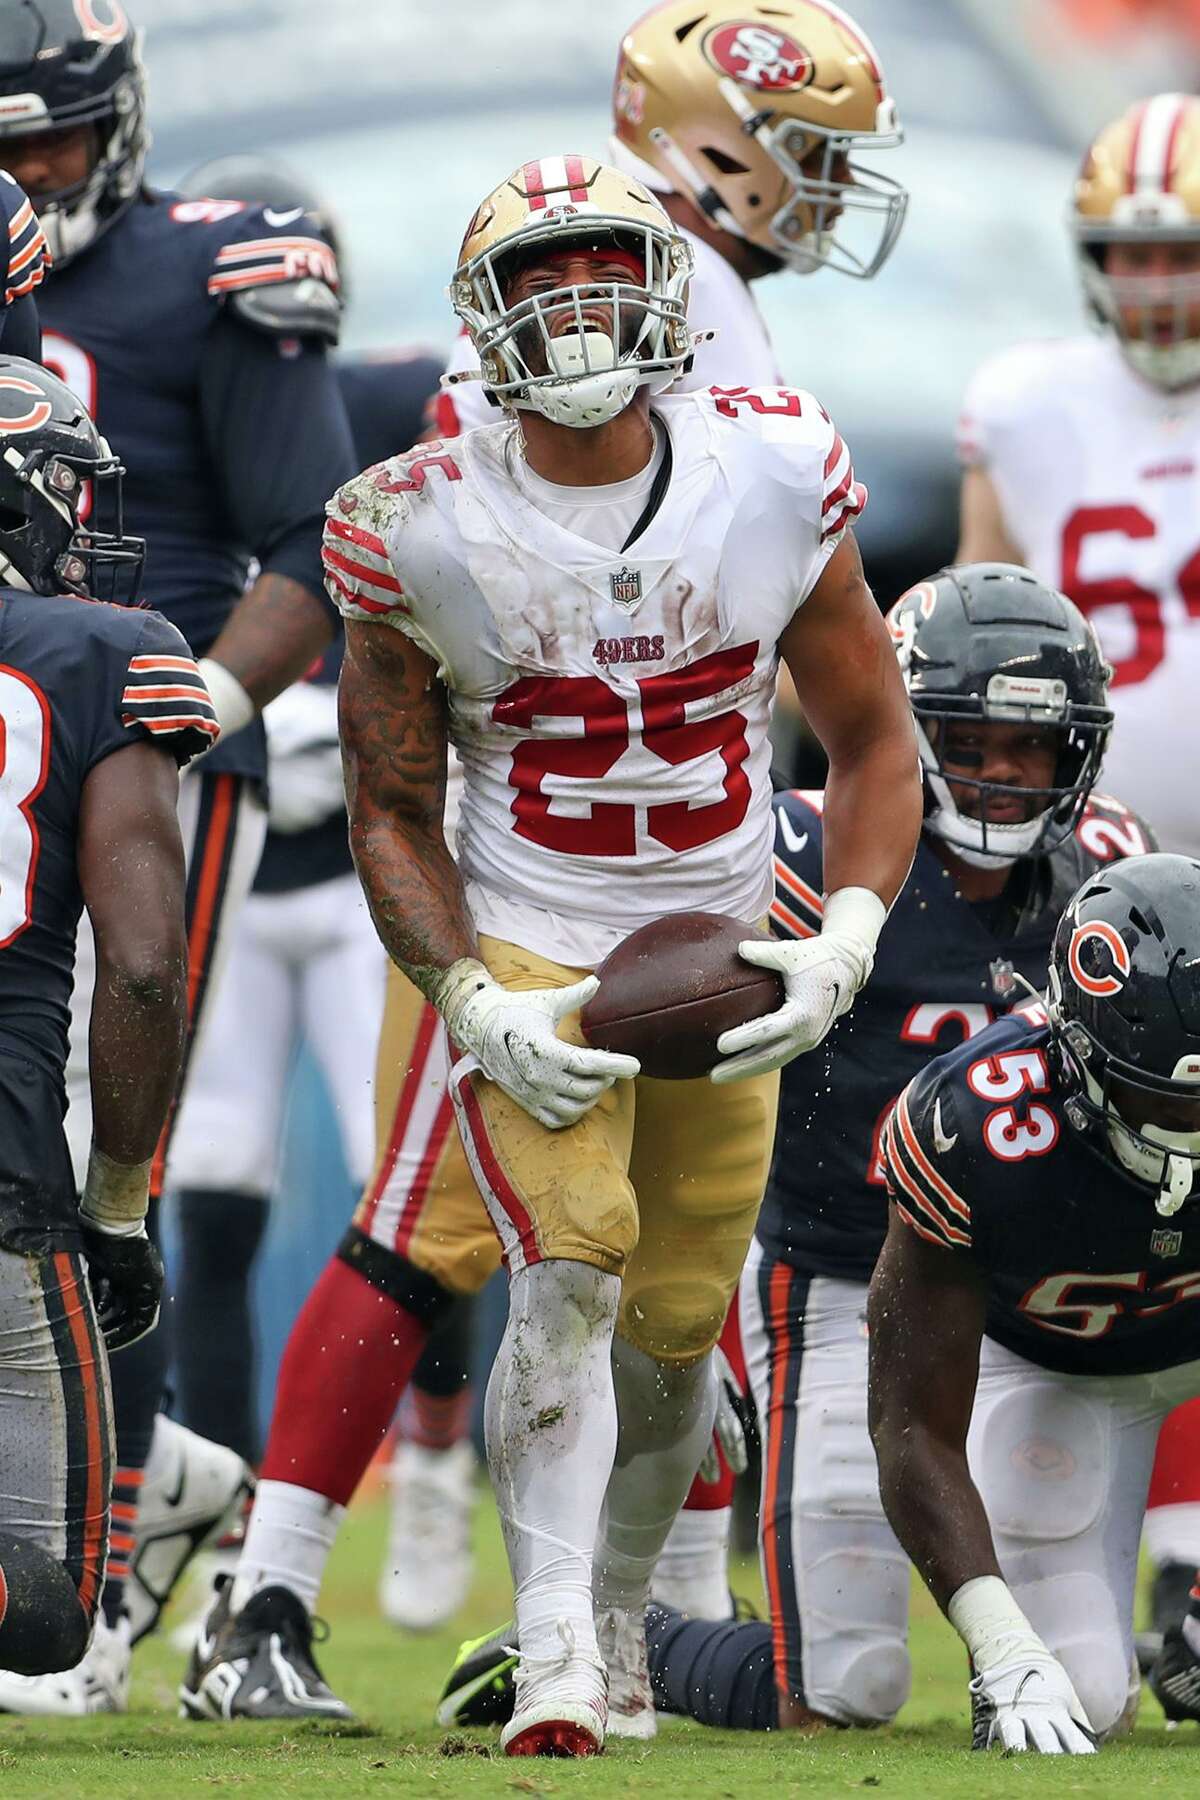 49ers running back Elijah Mitchell hasn’t played since the season-opening loss to the Bears, when he ran for 41 yards.